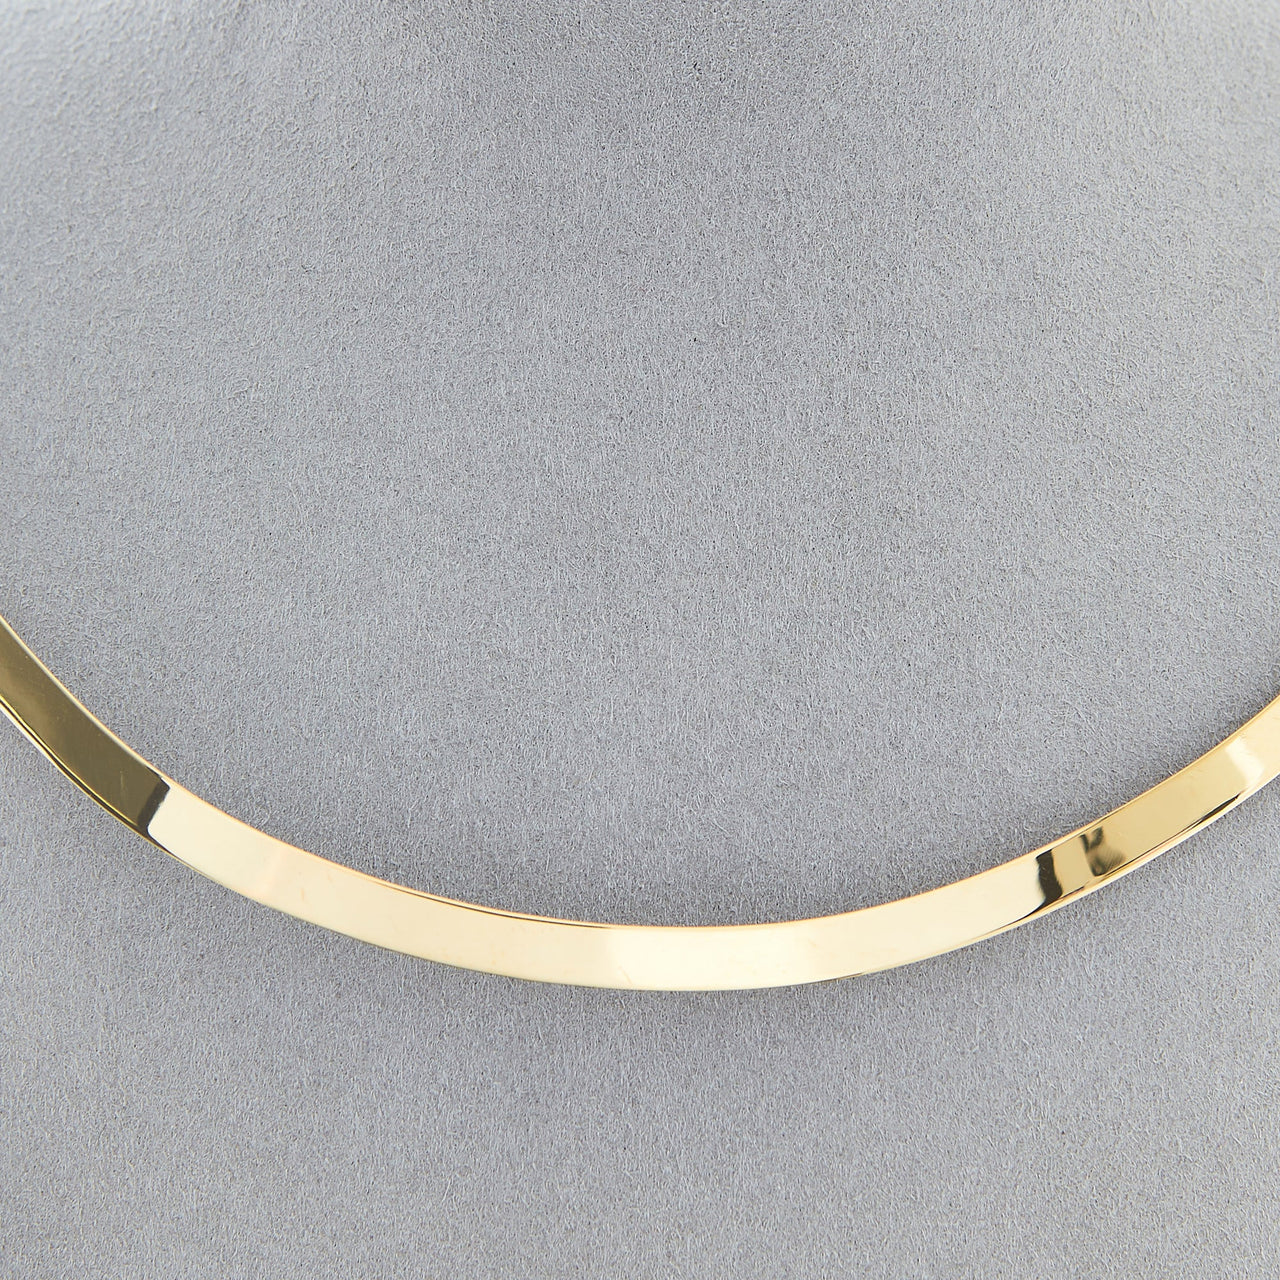 Pre-Owned 14ct Yellow Gold Rigid Collar Necklace